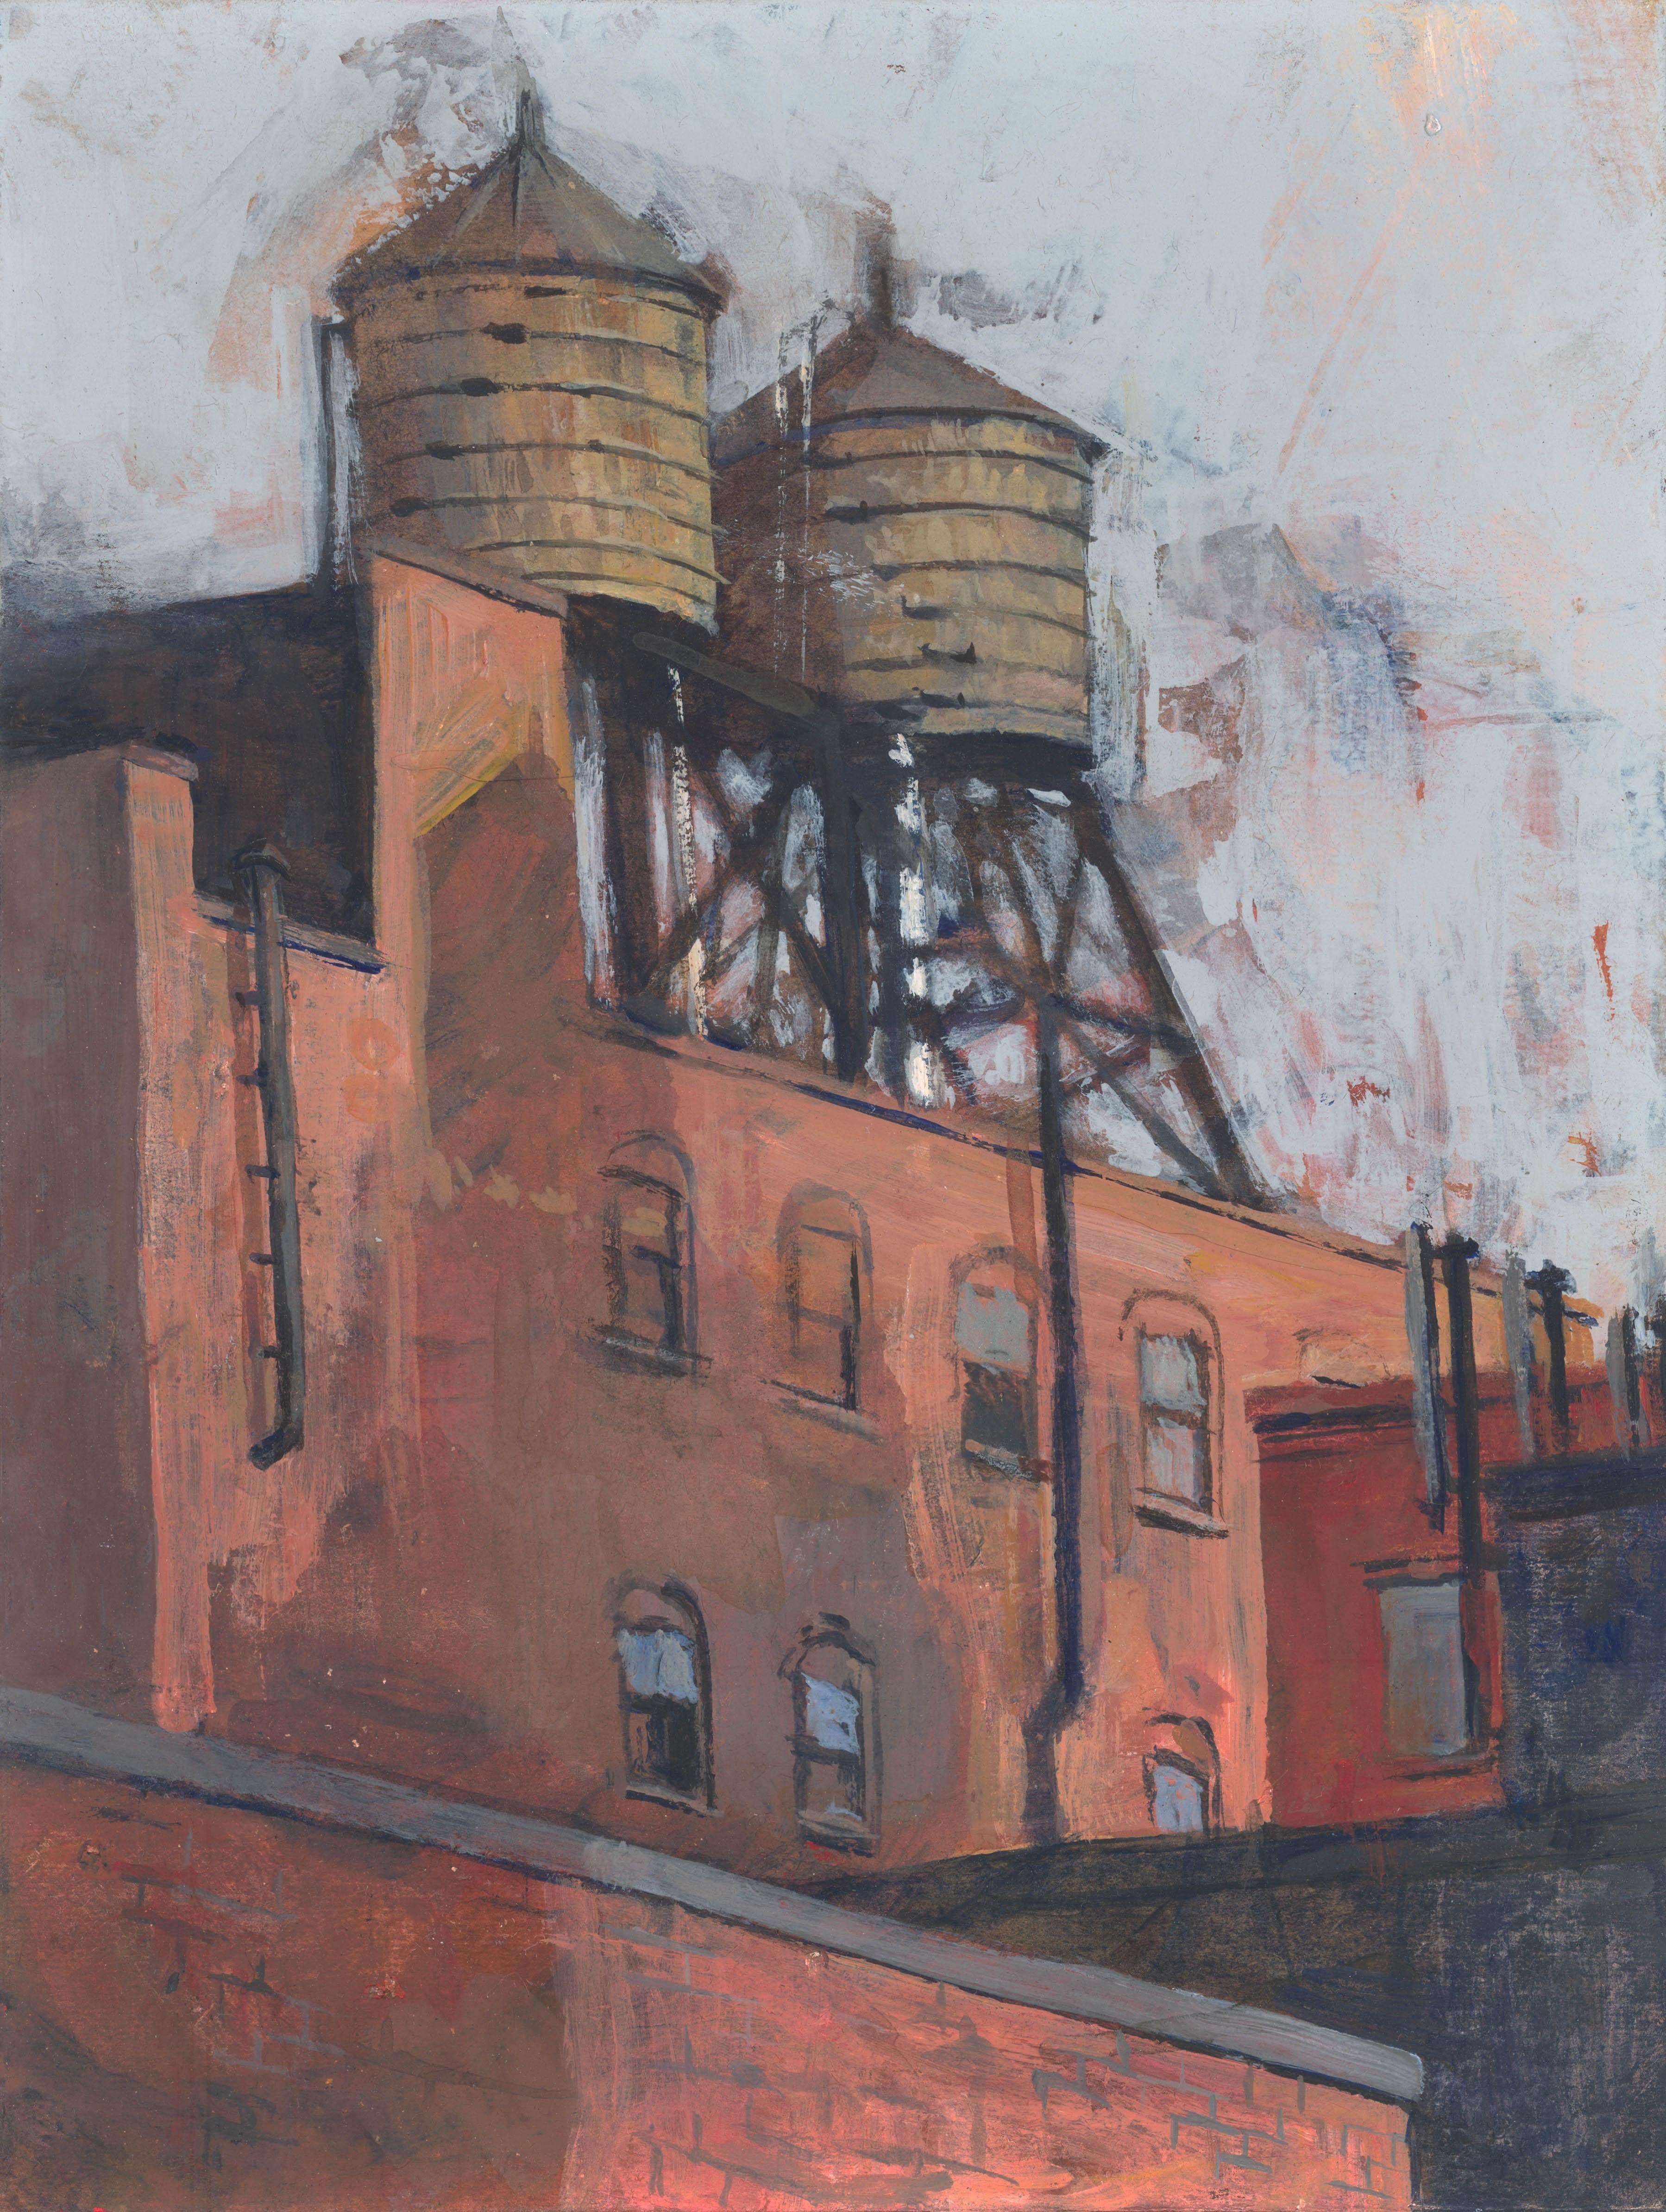 Jeff Faerber Landscape Painting - "Water Tower Shadow, " Mixed Media Painting